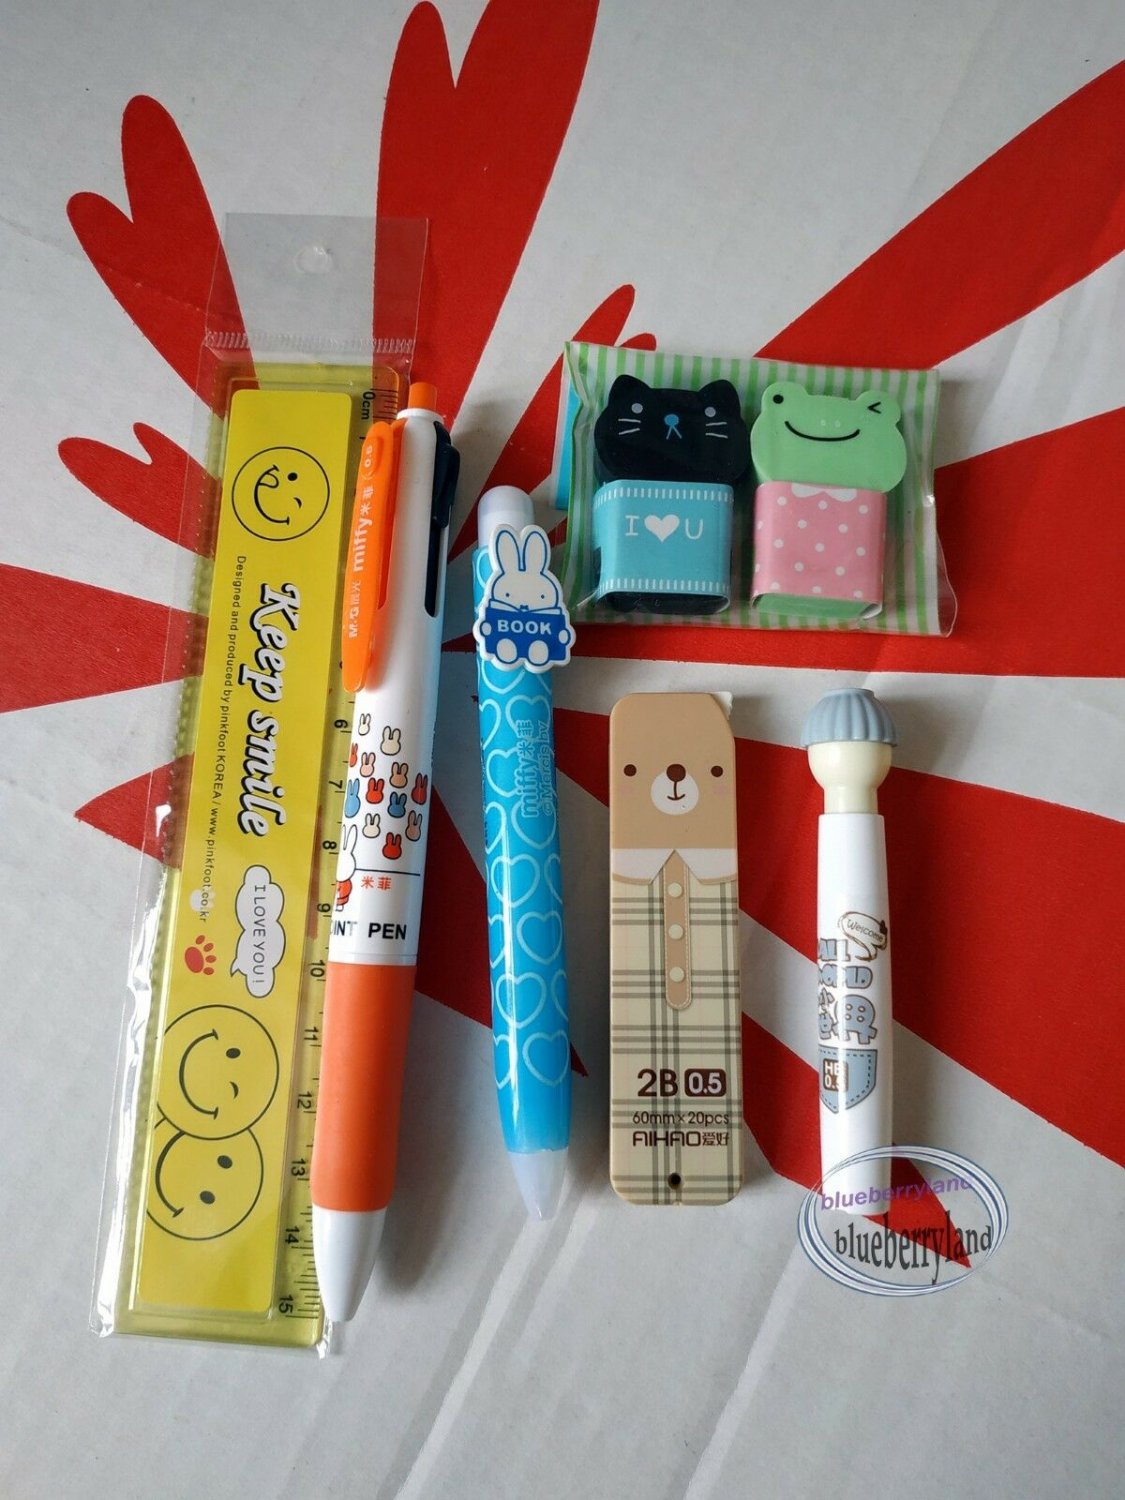 7 pieces Stationery Set Writing MIFFY Pencil Ball pen eraser ruler kit school office supply A